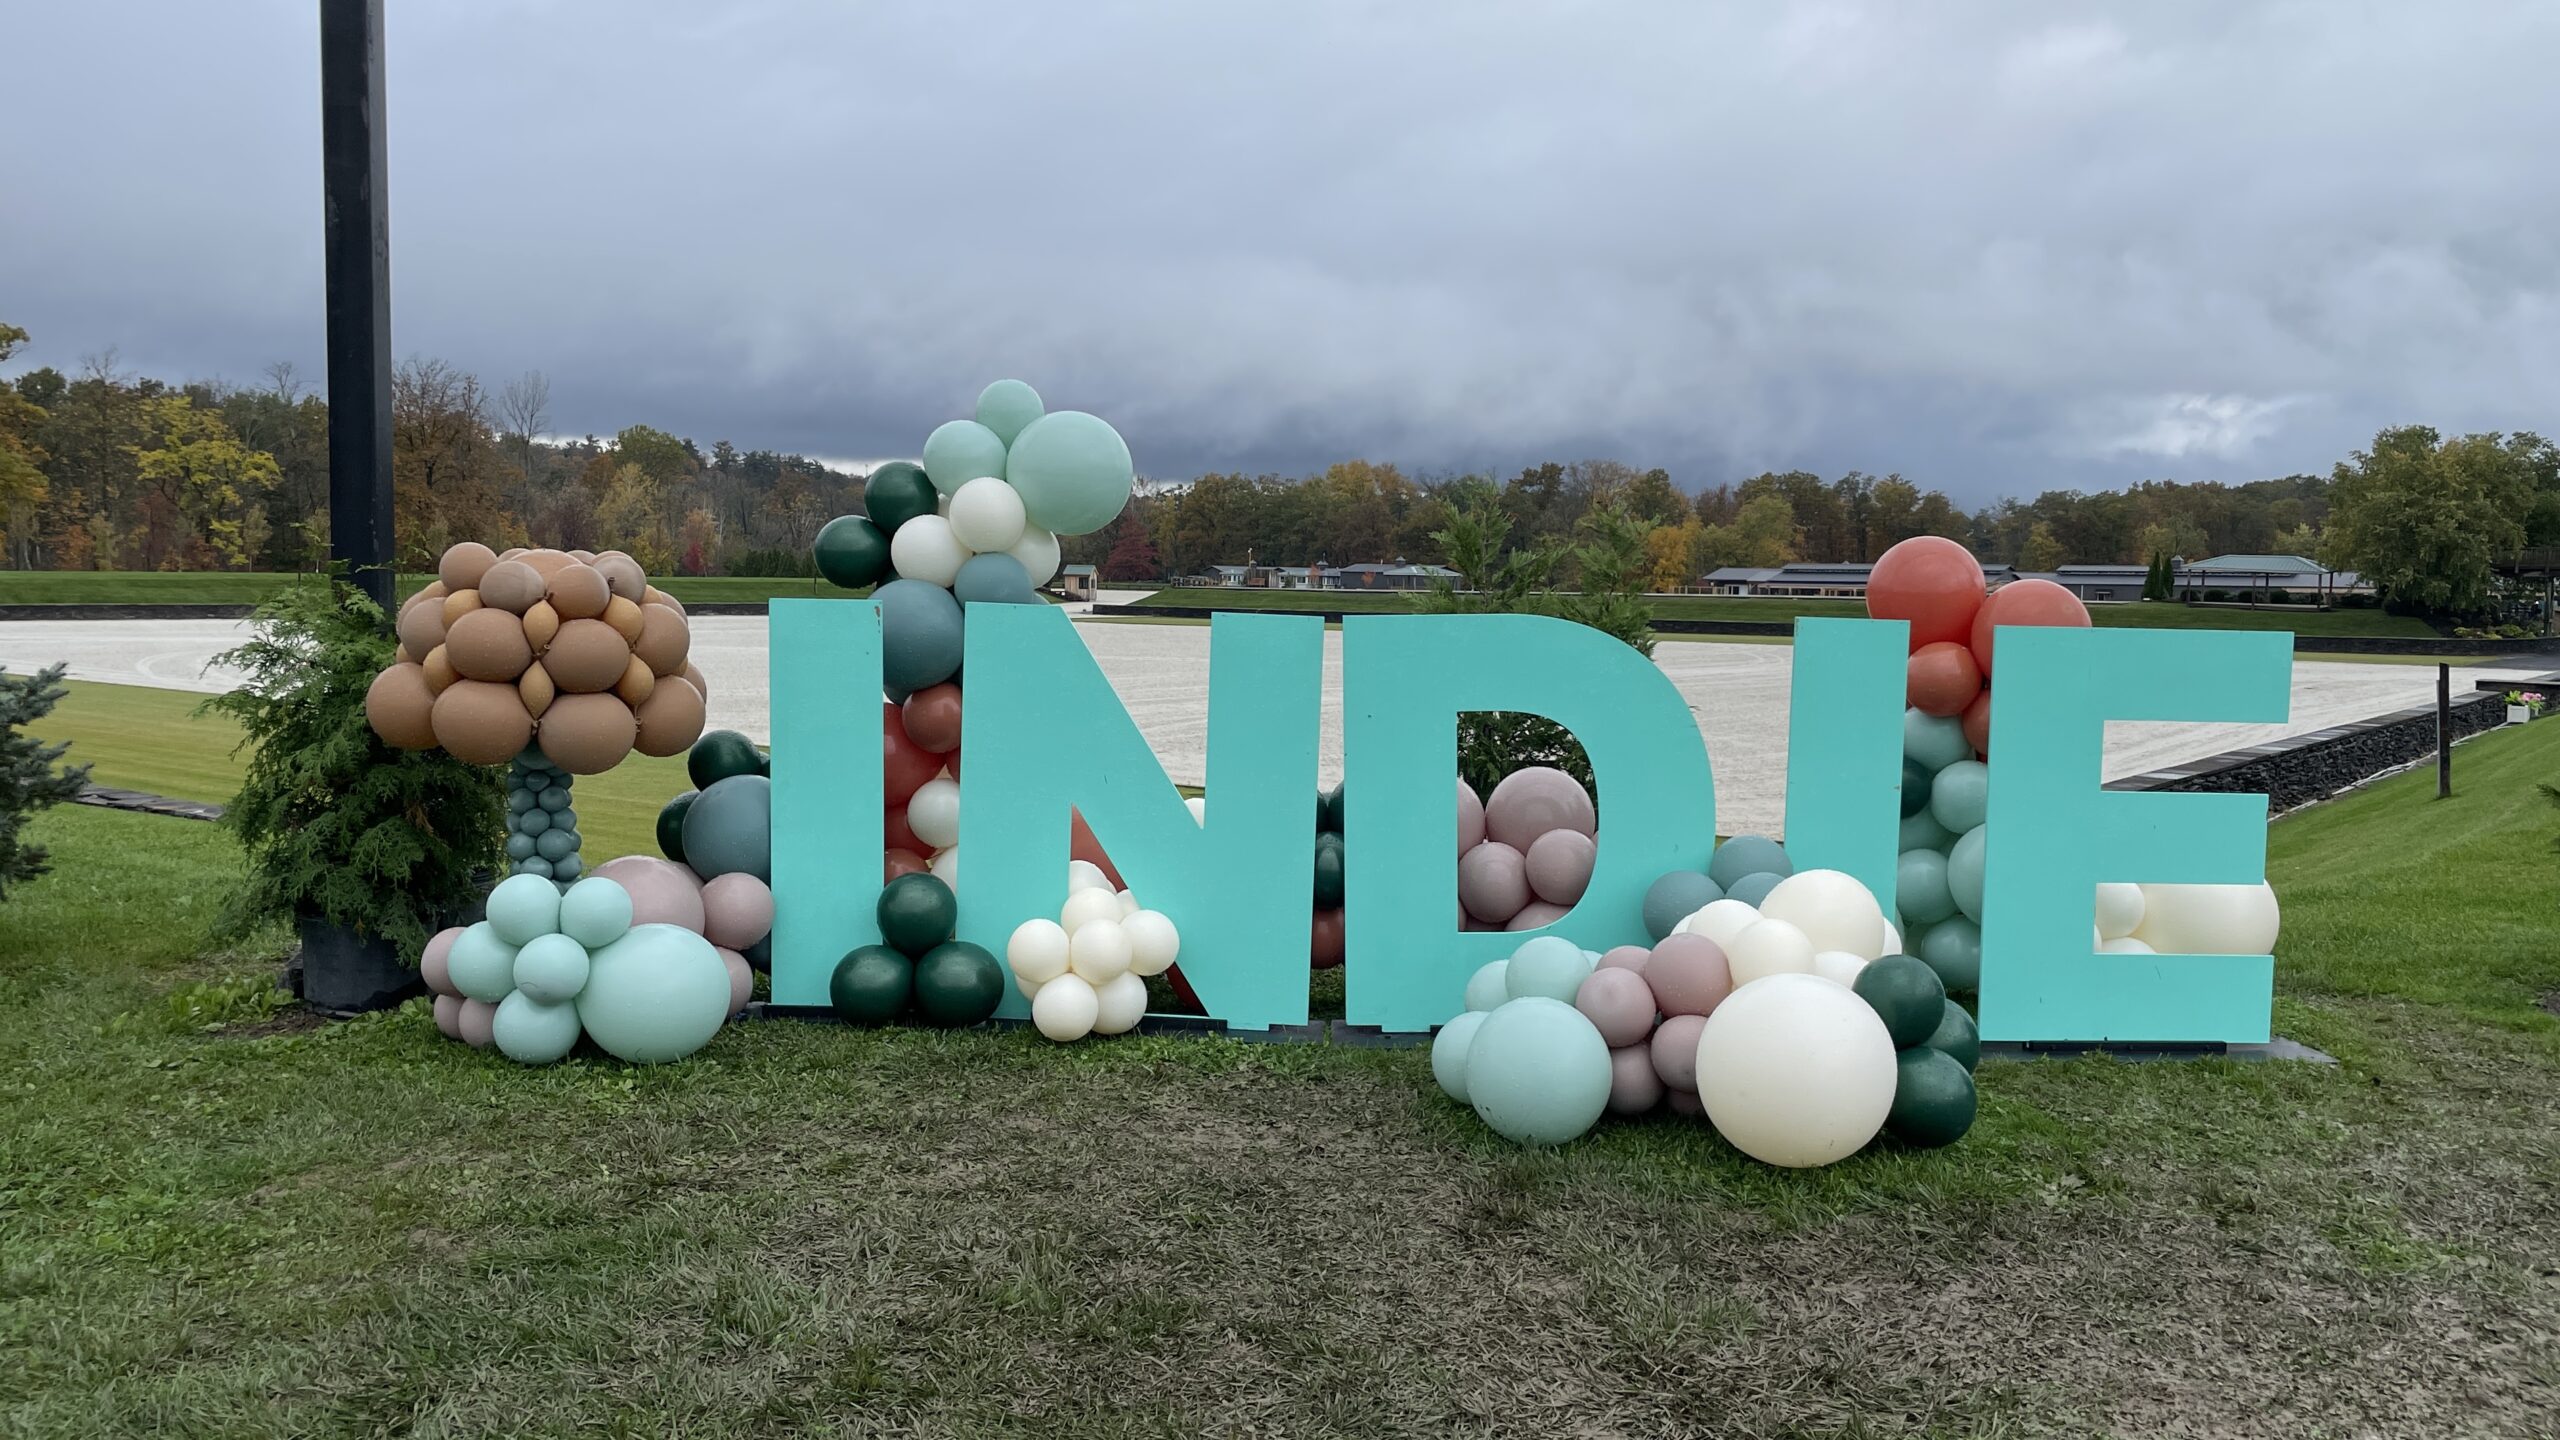 Aqua letters spelling the word indie surrounded by ballons.